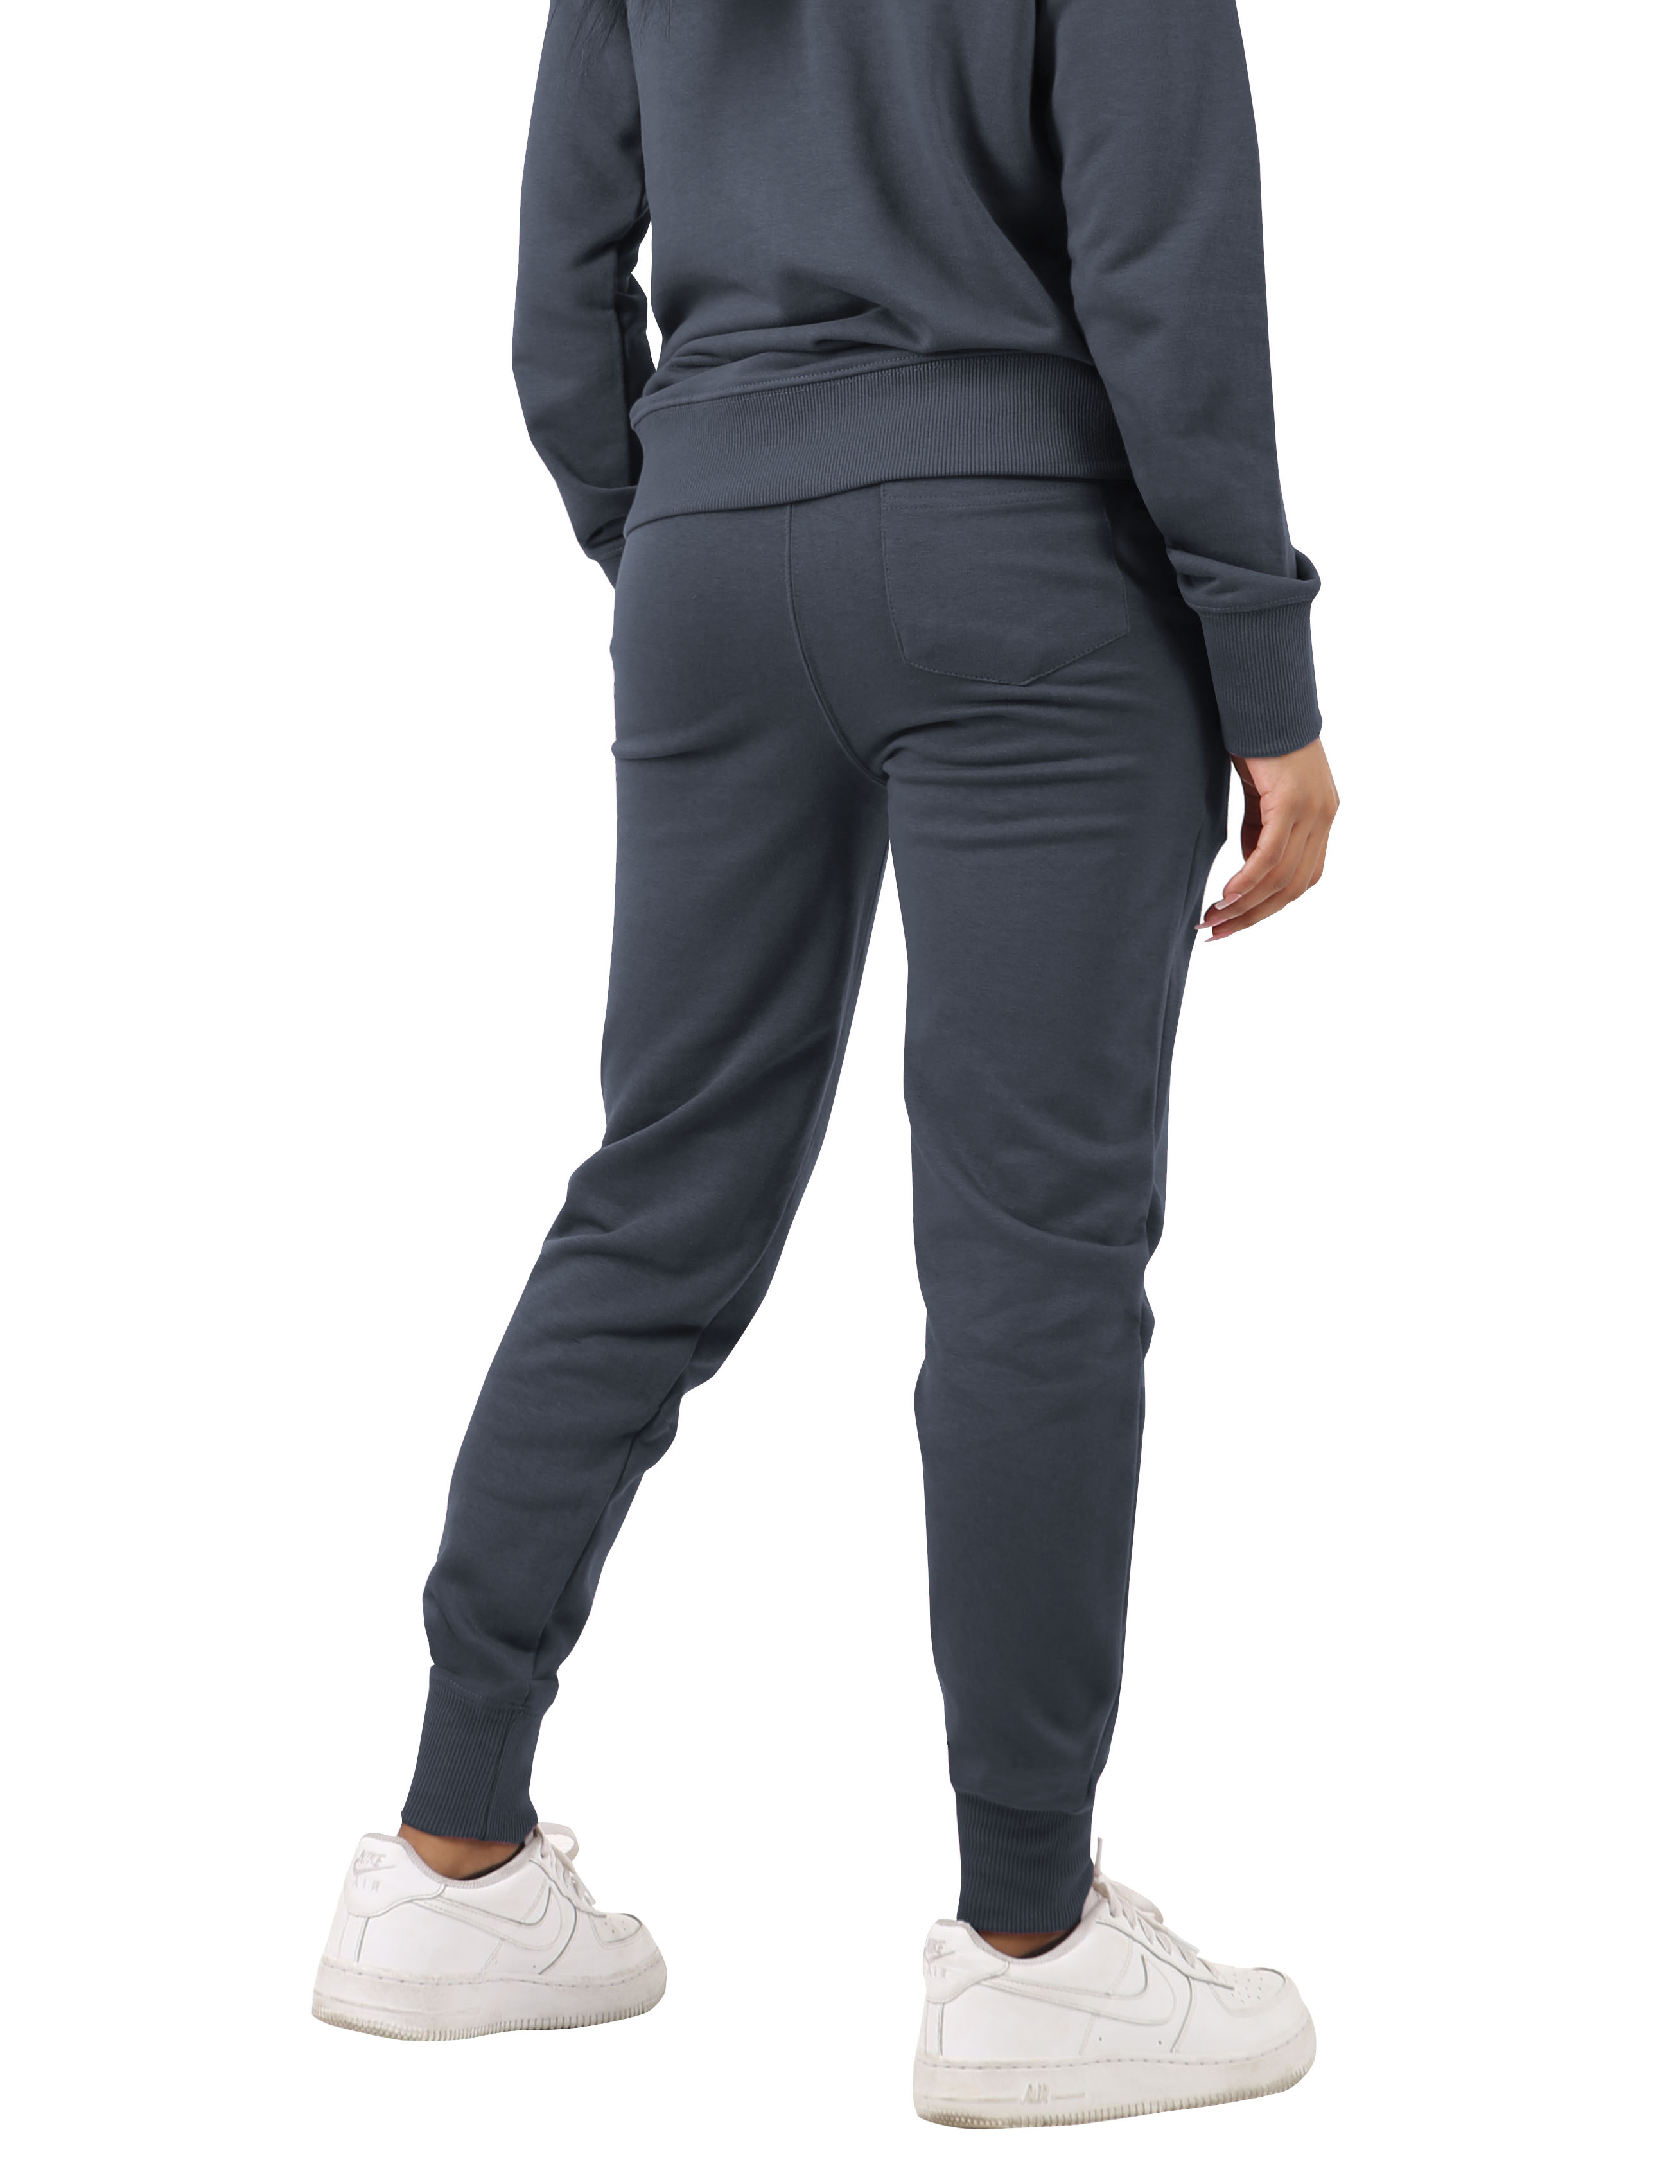 Ma Croix Womens Premium French Terry Joggers Wrinkle Resistant Sweatpants - image 2 of 6